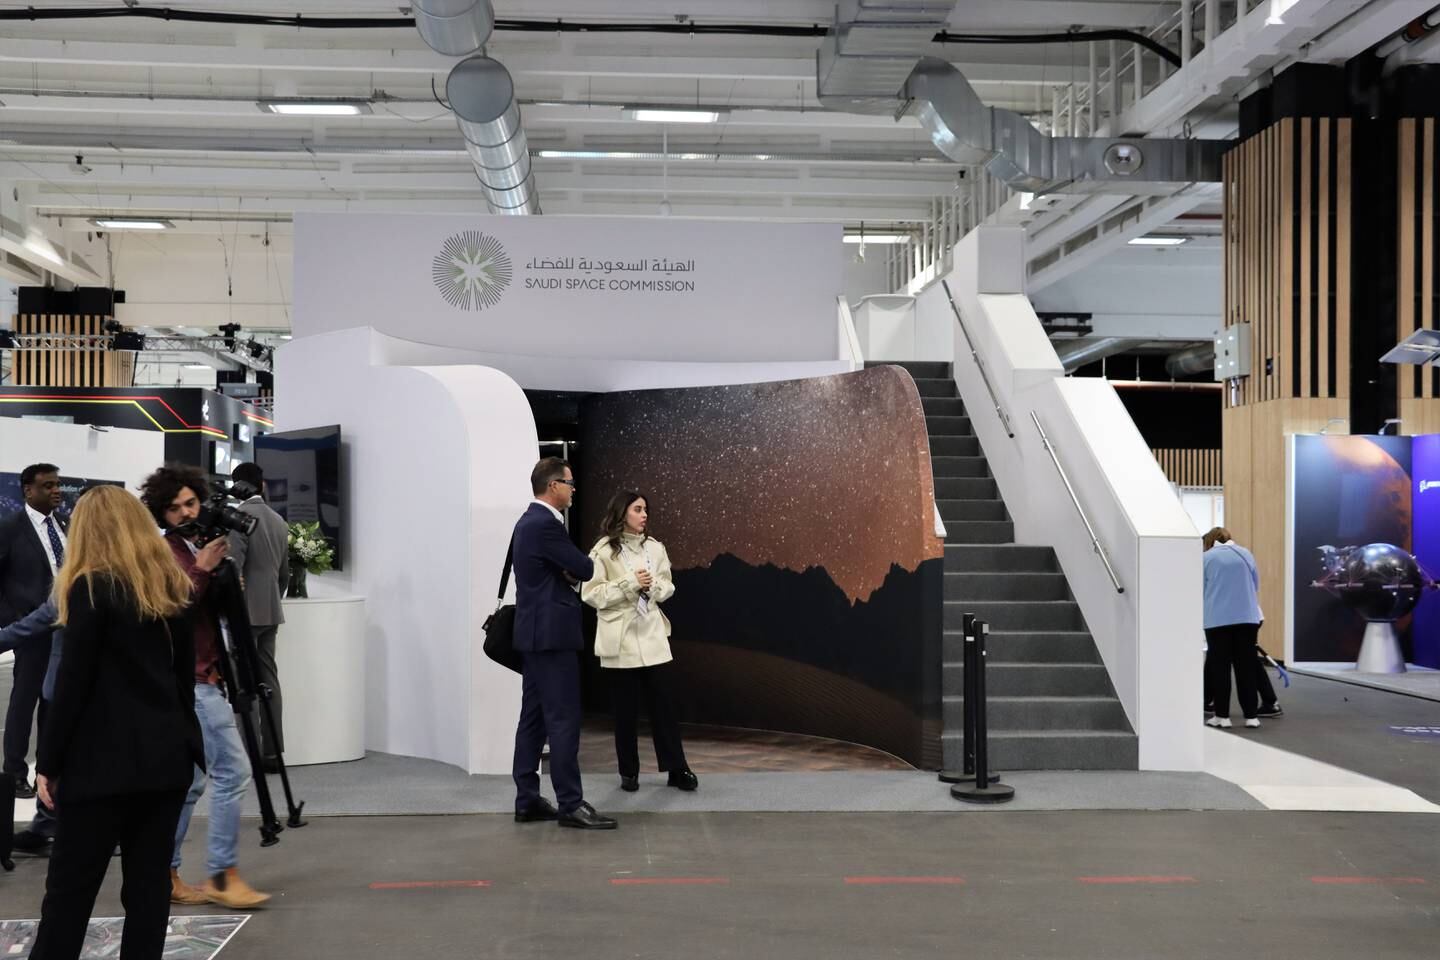 The Saudi space agency's stand at the IAC 2022 in Paris. Photo: Sarwat Nasir / The National